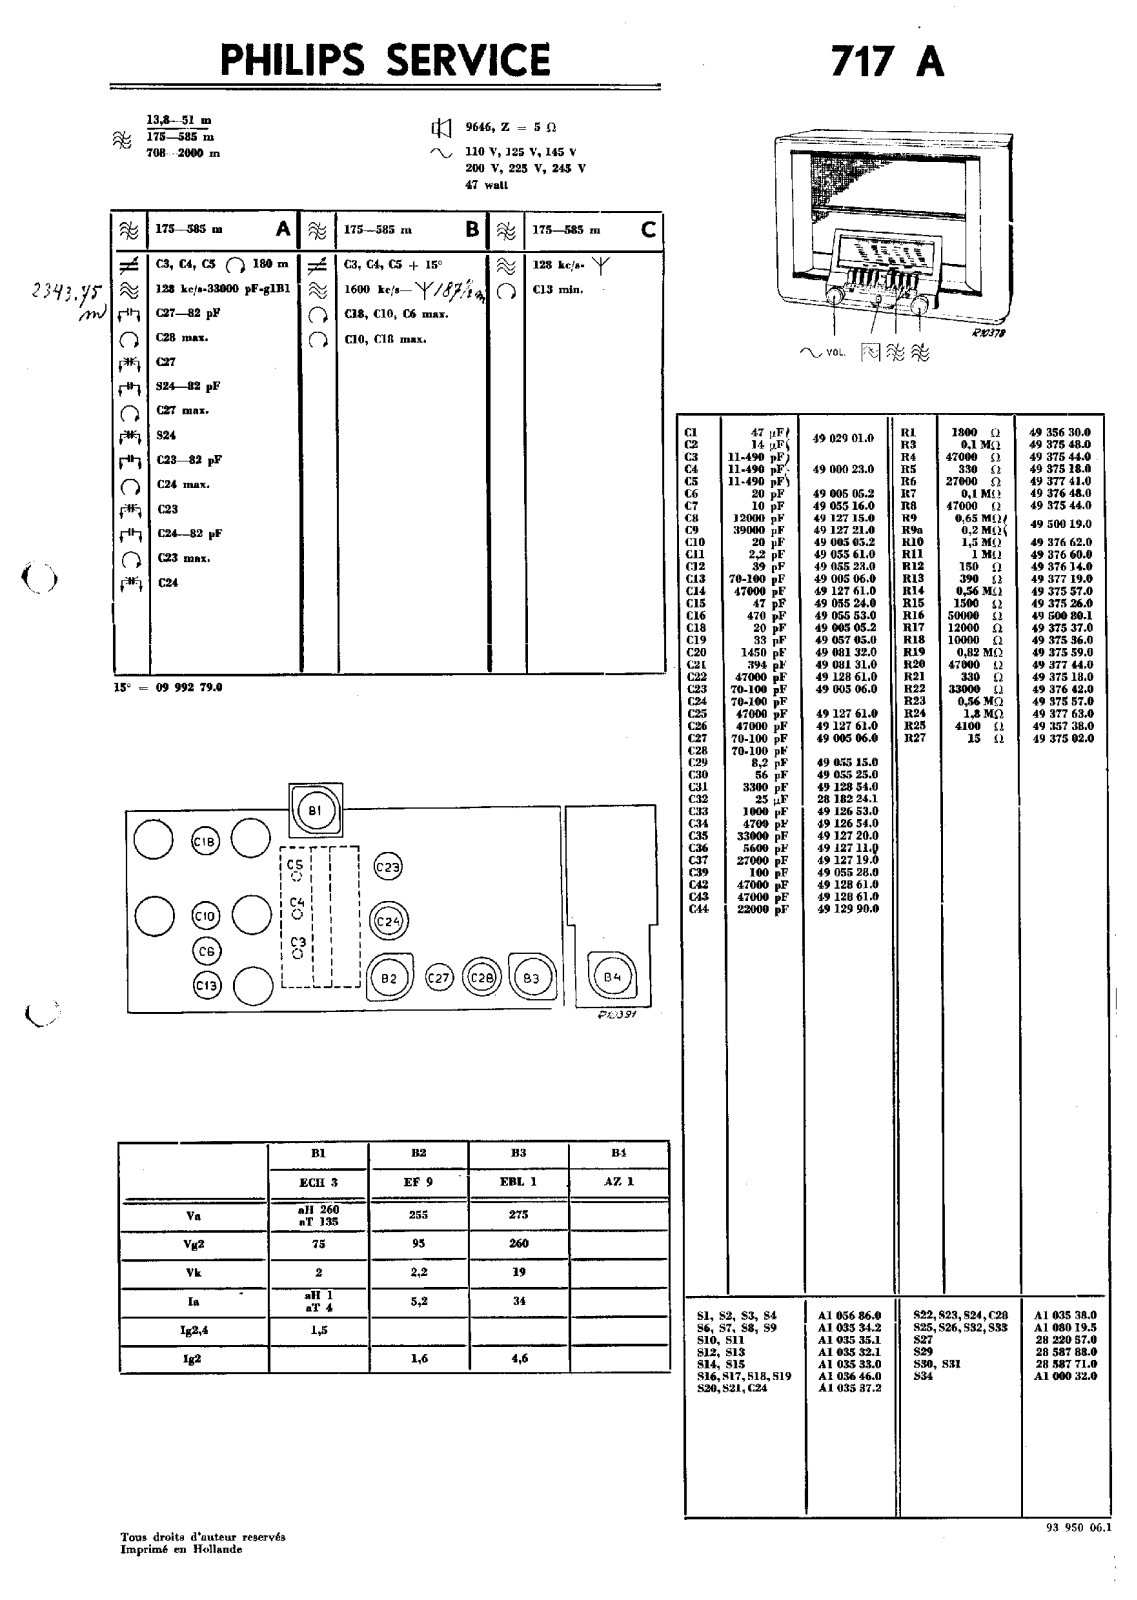 Philips 717-A Service Manual